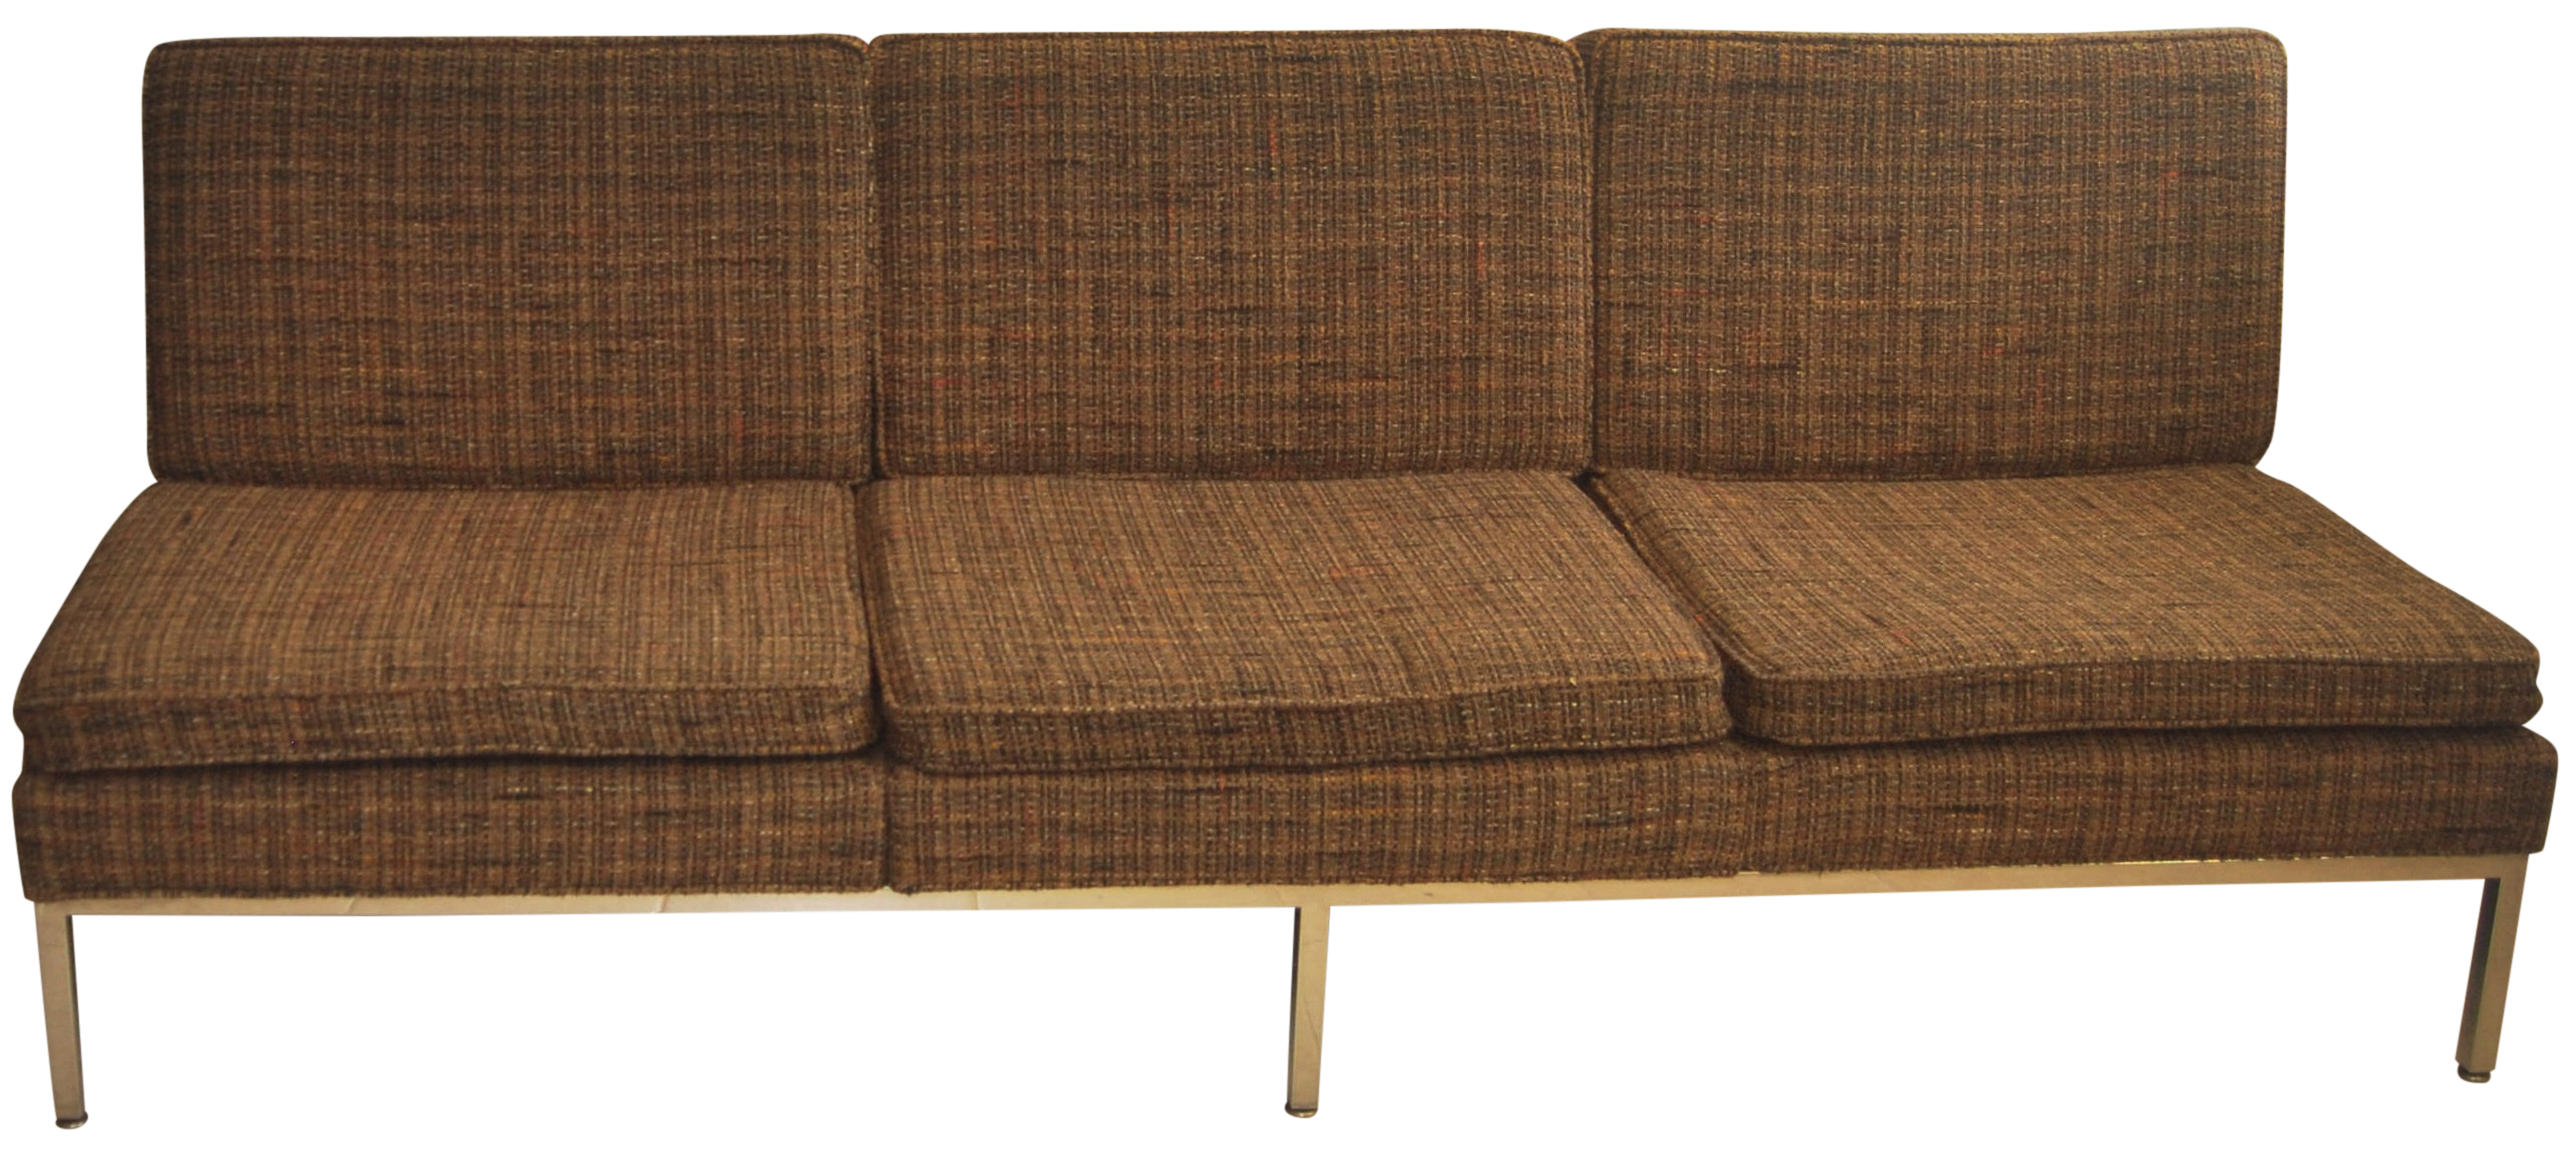 Mid Century 3 Seat Sofa On Chrome Frame | Chairish Three Seat Sofa, Mid Pertaining To Mid Century 3 Seat Couches (Gallery 15 of 20)